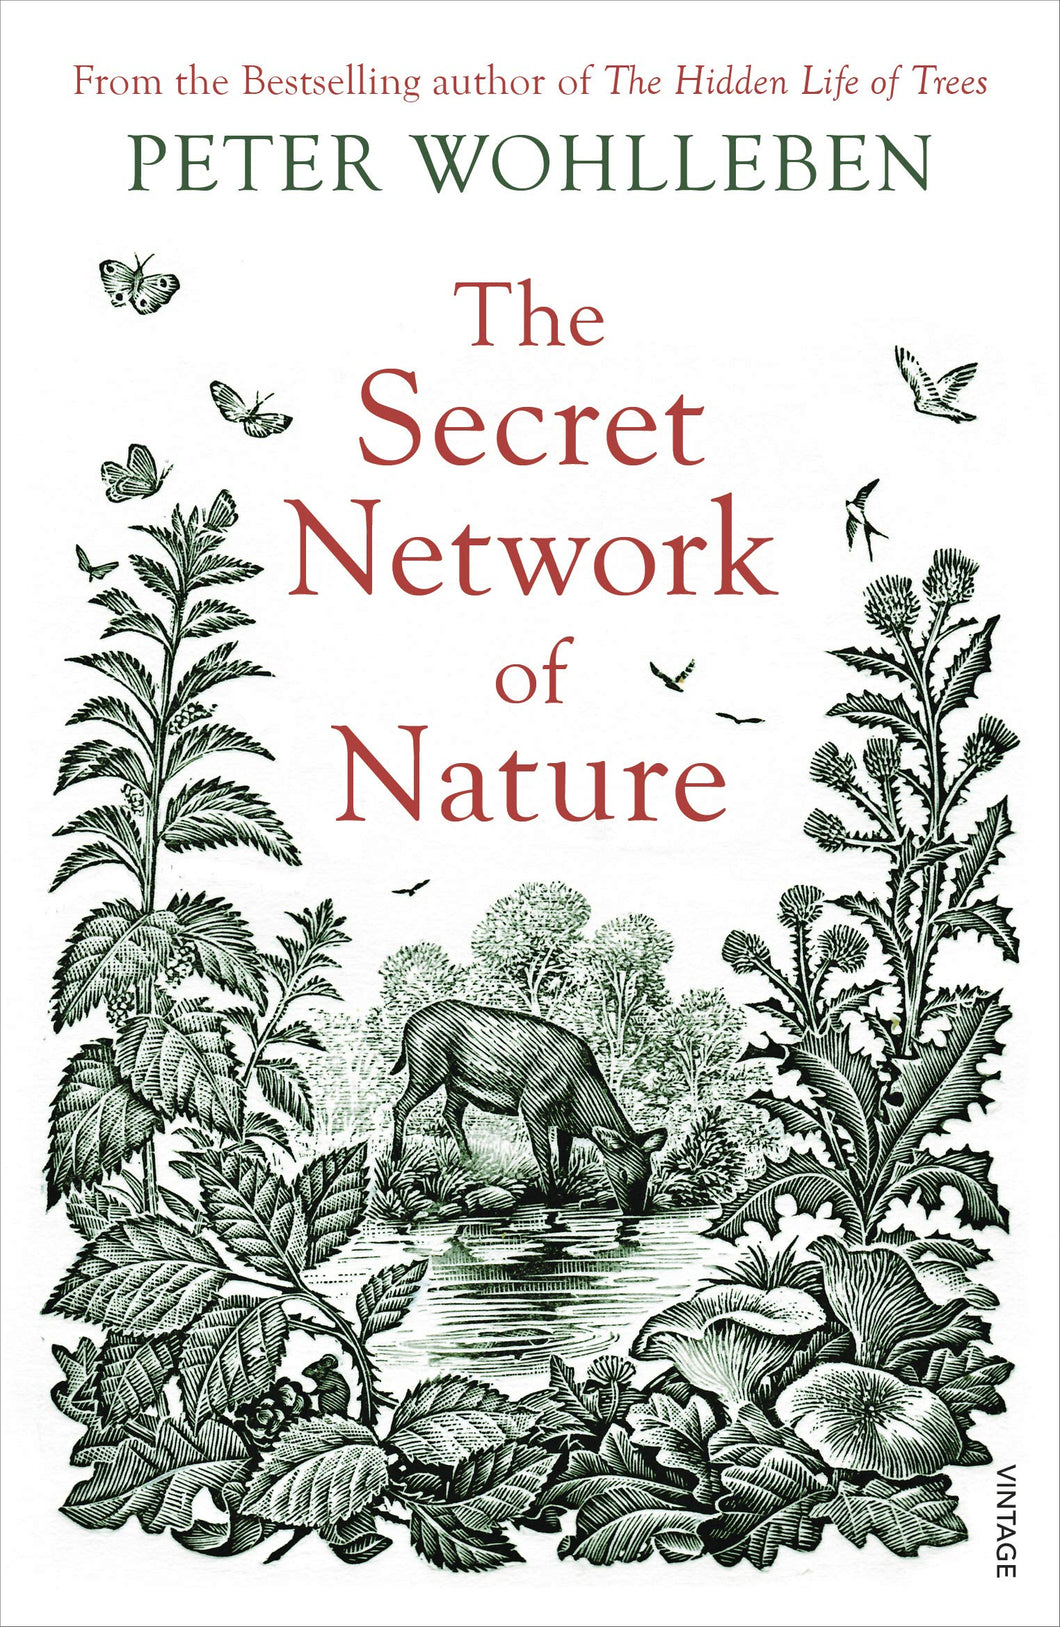 Book - The Secret Network of Nature